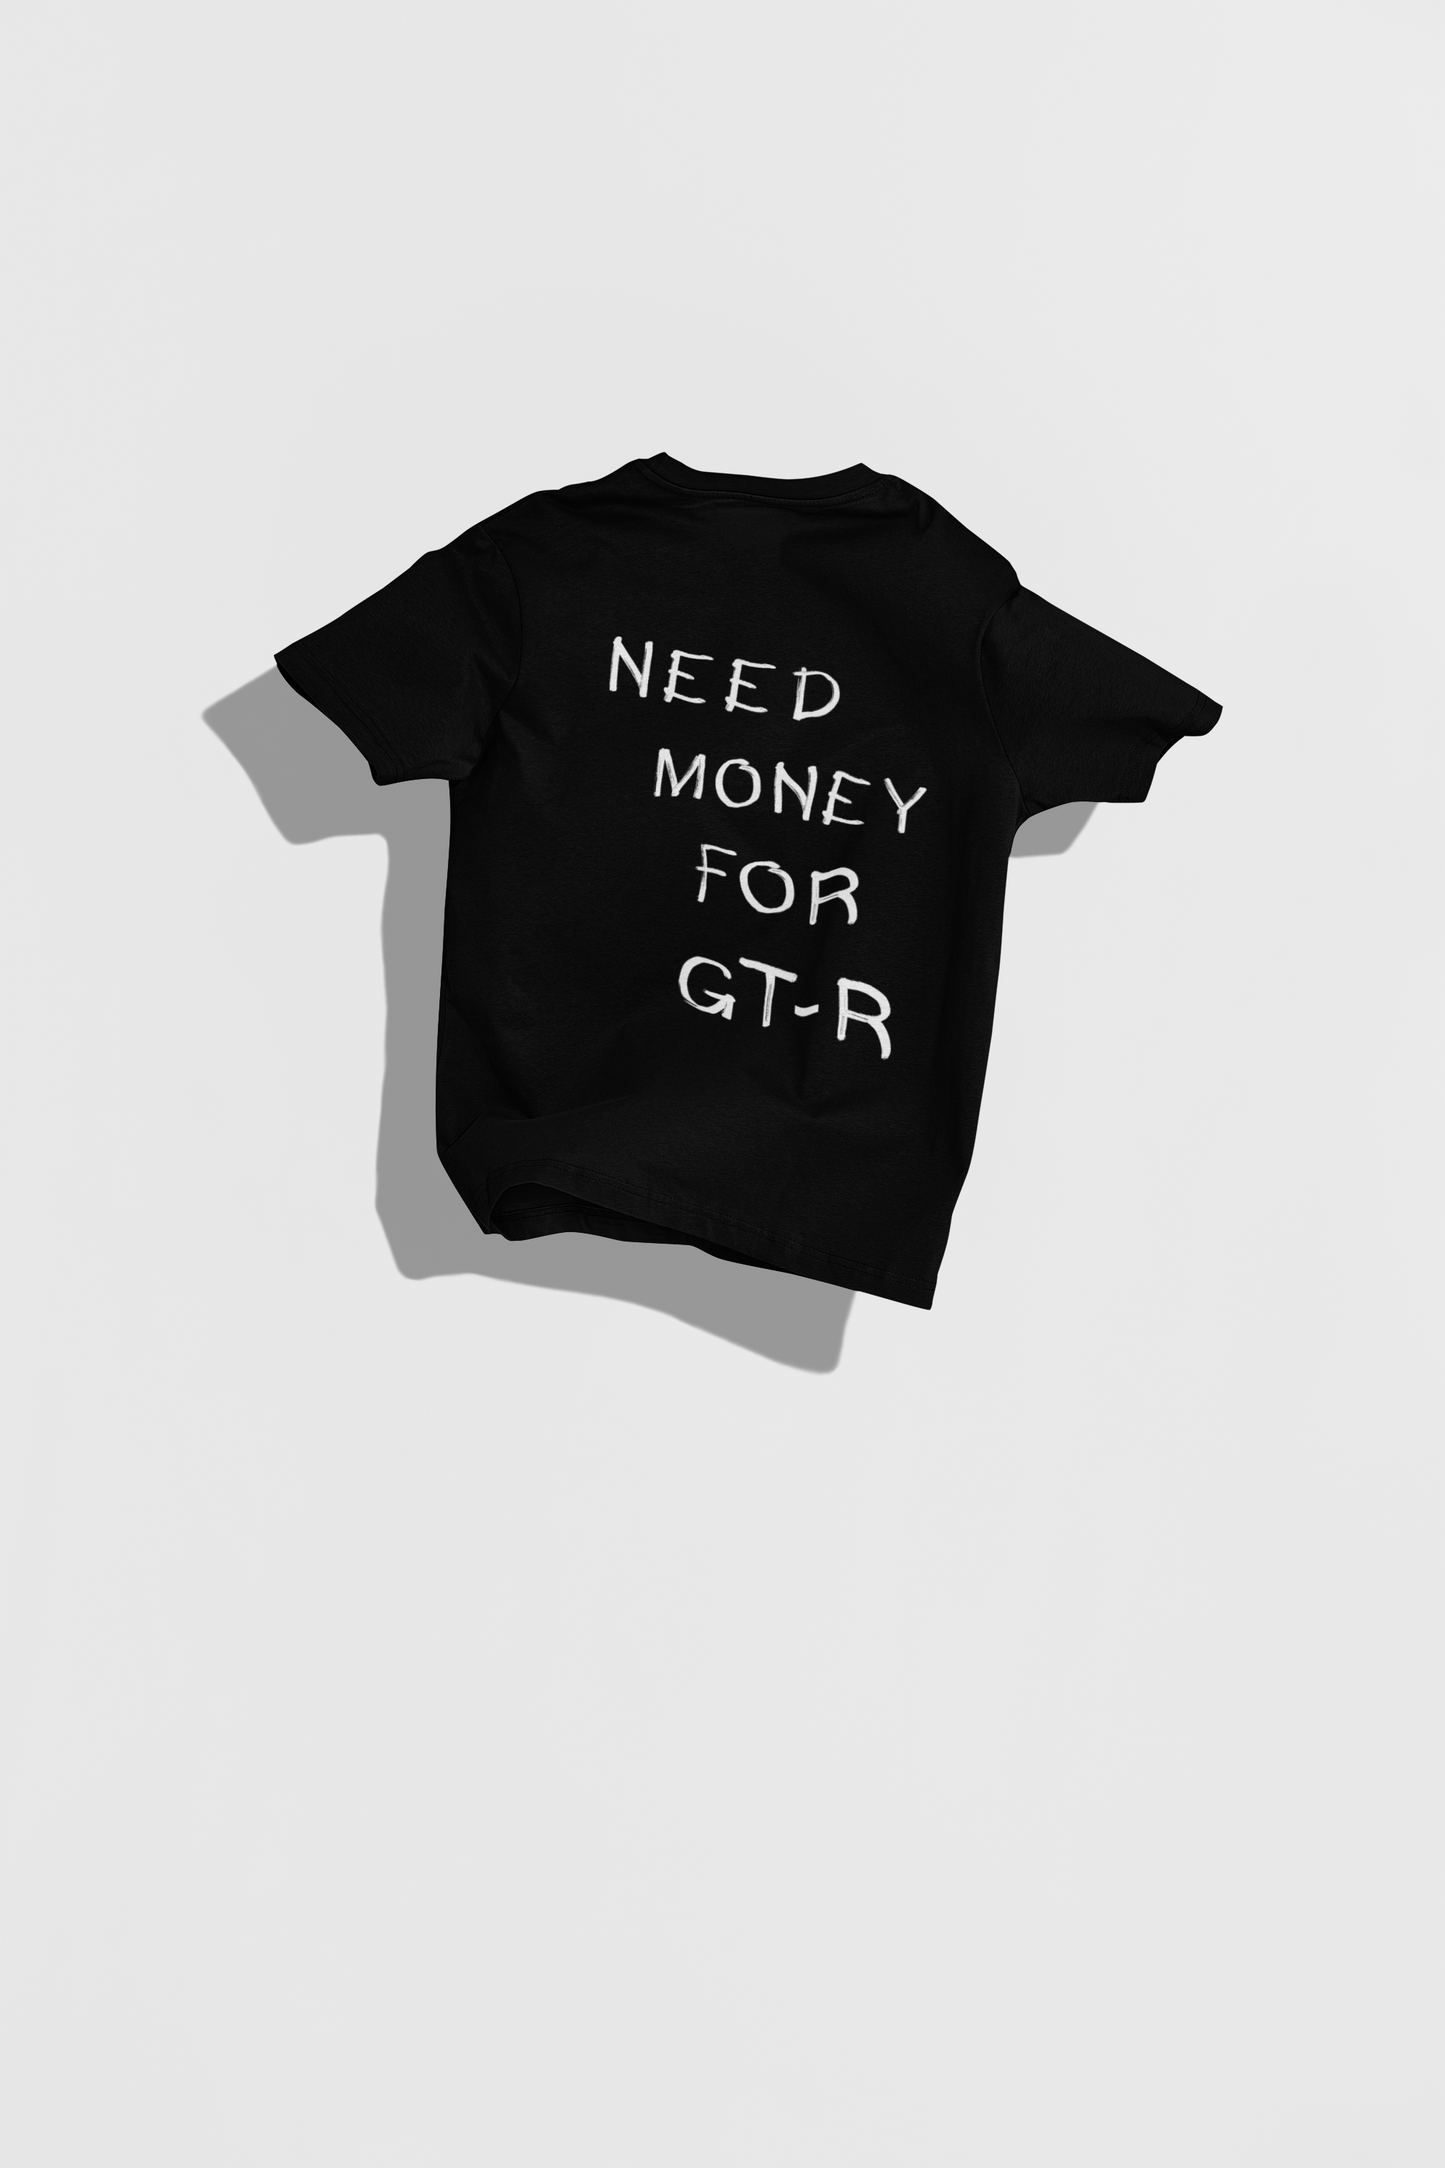 Need money for GT-R (Black)